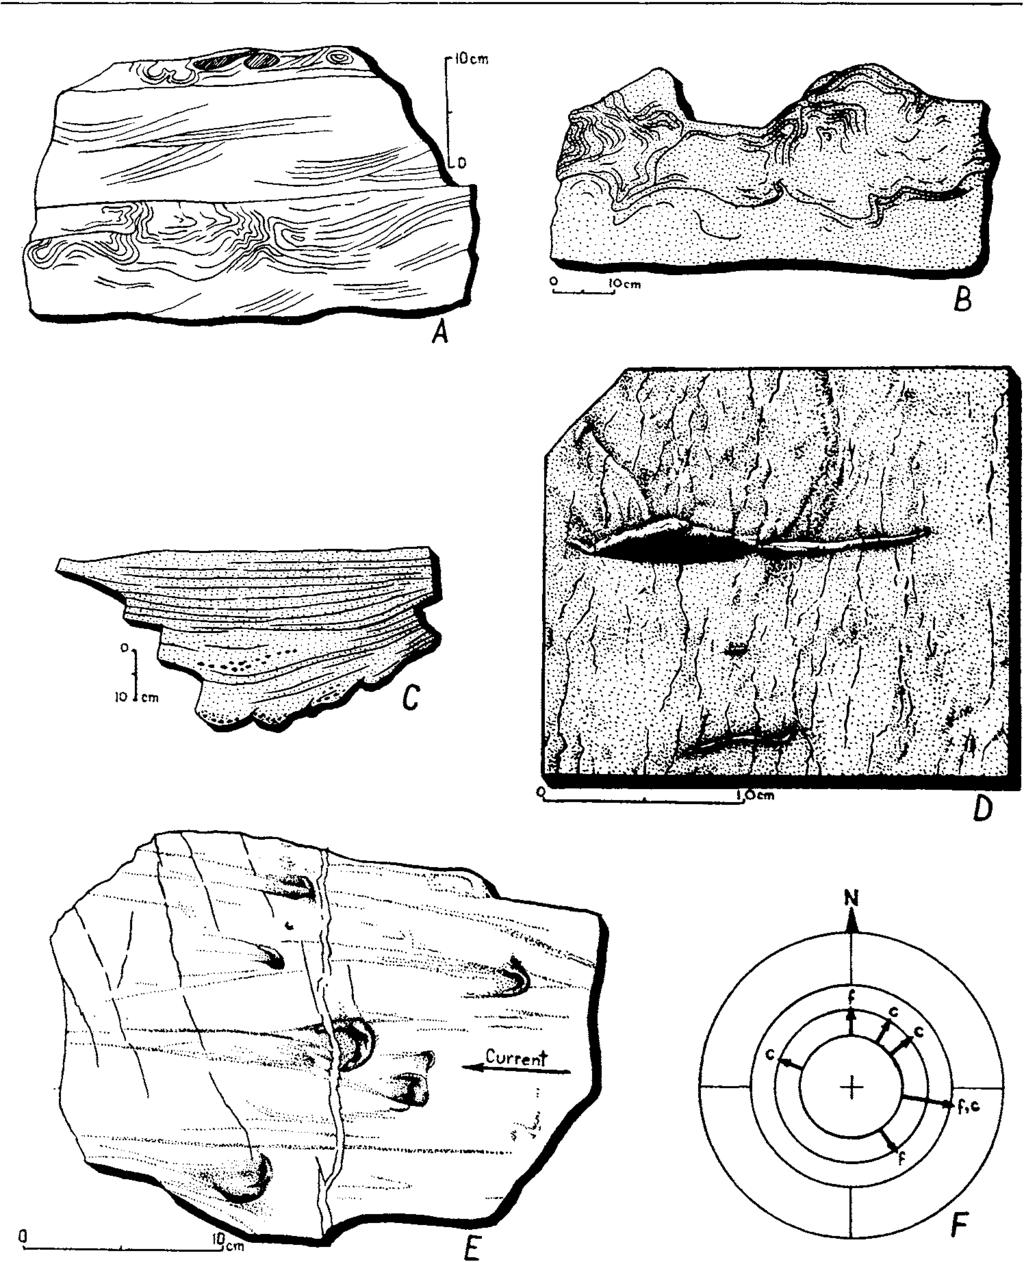 148 KRZYSZTOF BRKENMAJER N 0 A - Fig. 7. Sedimentary structures of the Keltiefjellet Divis1:on at Lykta.